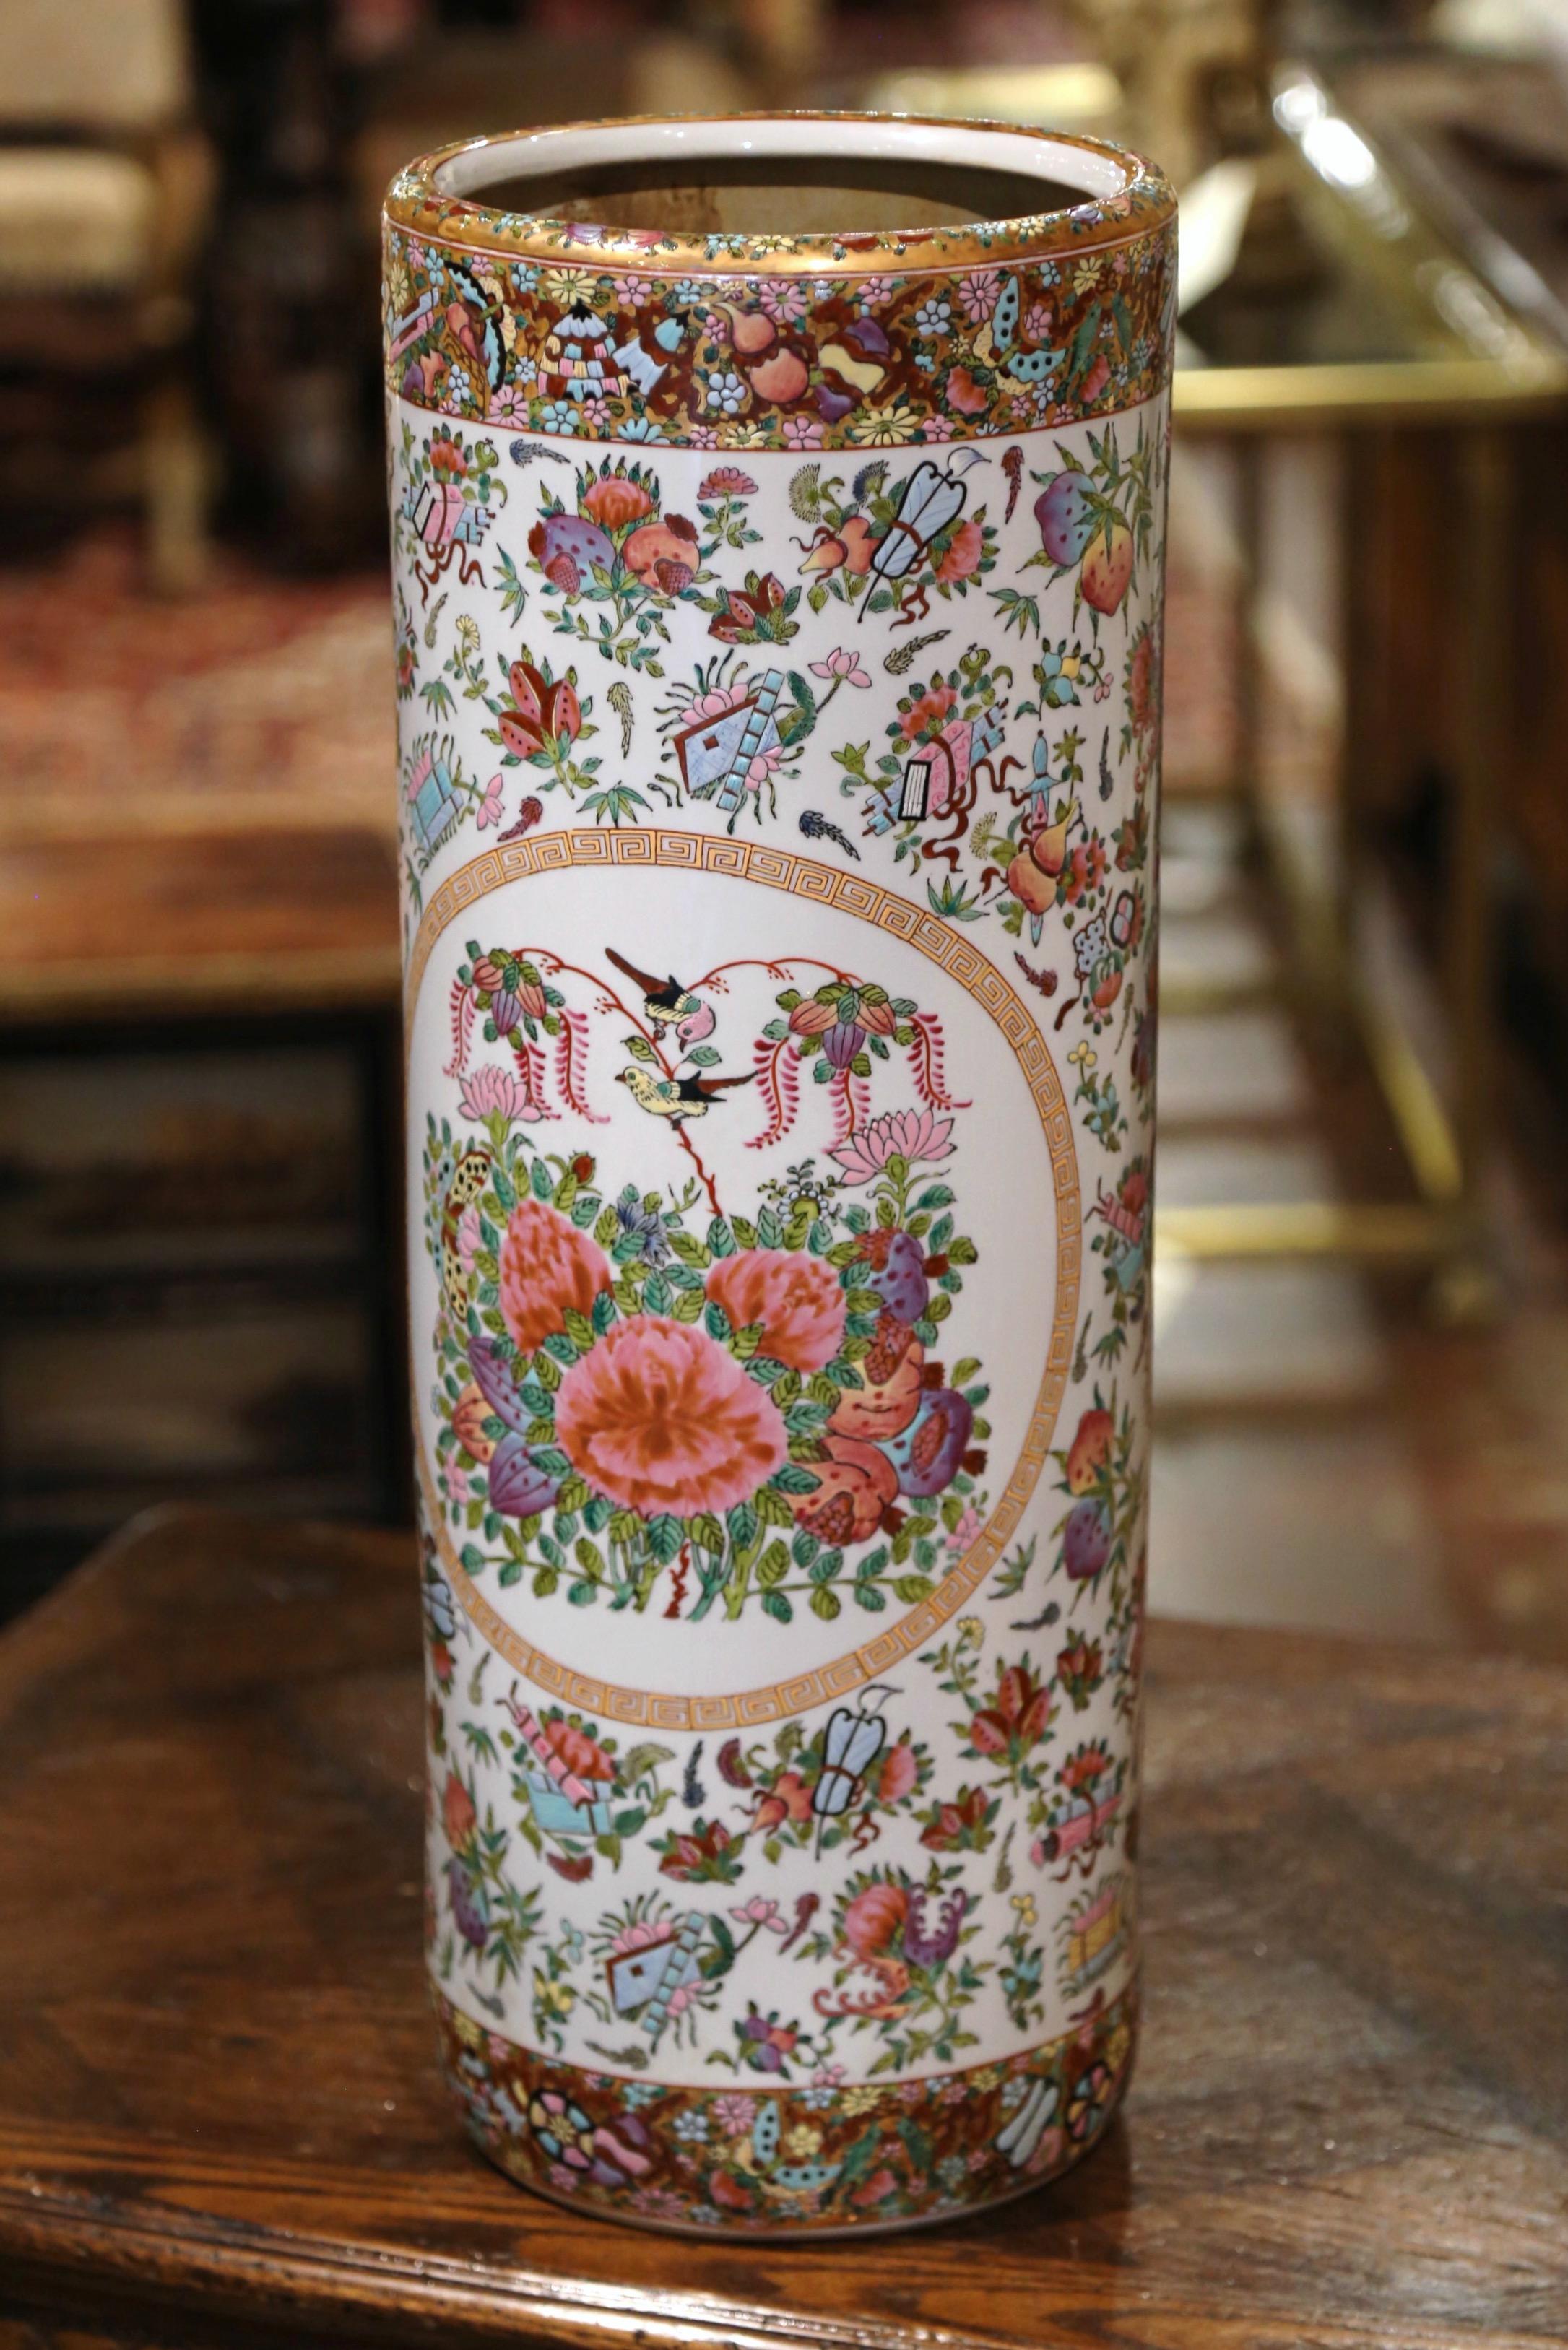 Created in China circa 1950, this large colorful rose medallion stand is round in shape and features hand painted floral reserves with birds and foliate motifs on a white background. The porcelain cane or umbrella stand is in excellent condition